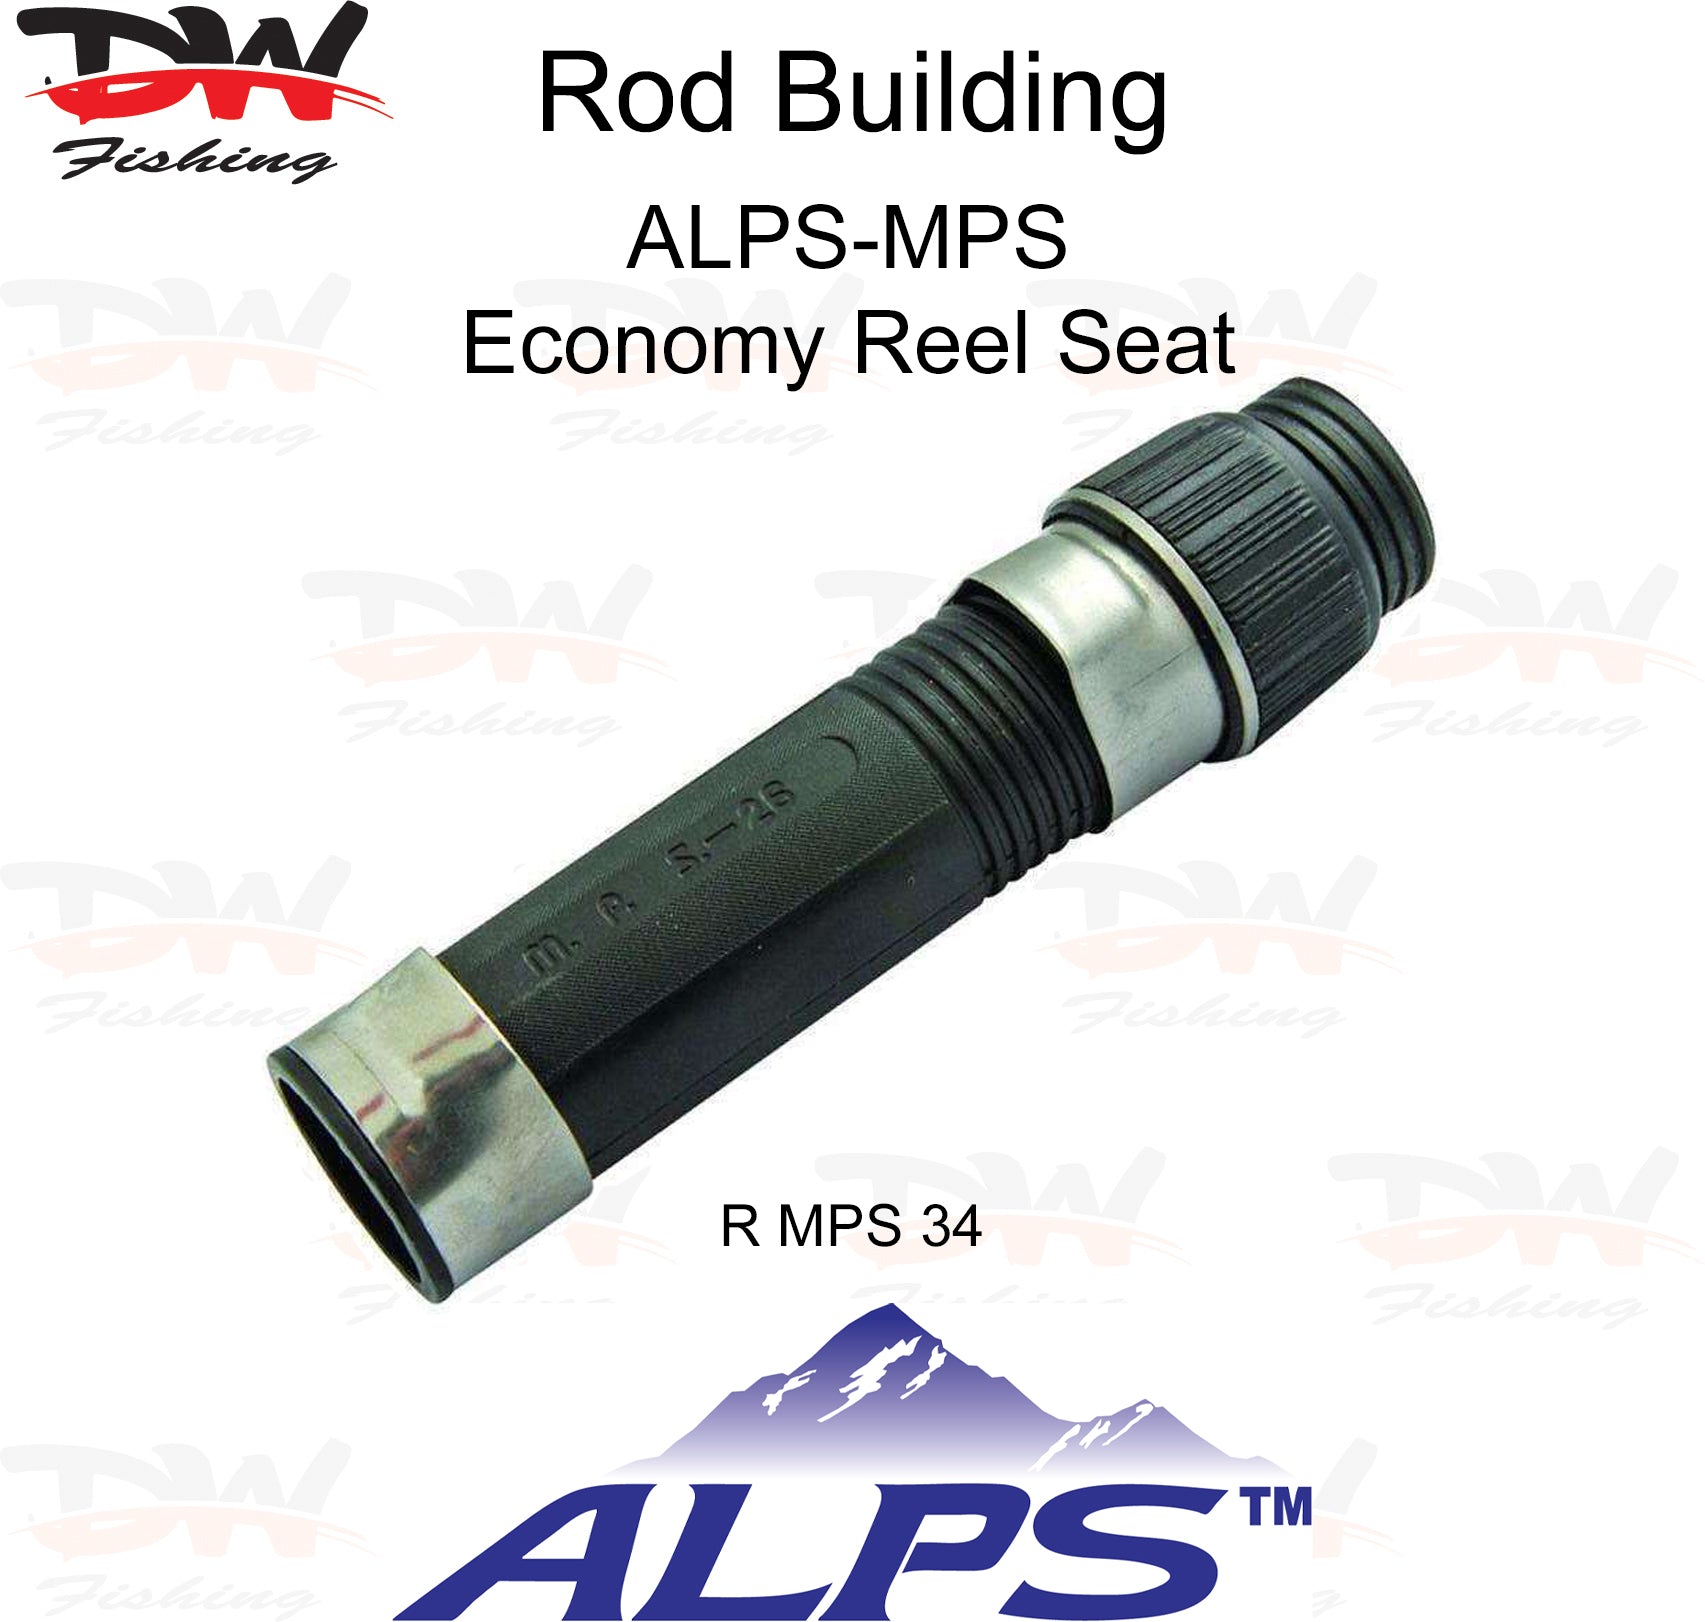 ALPS MPS economy reel seat size 34 with ALPS logo below